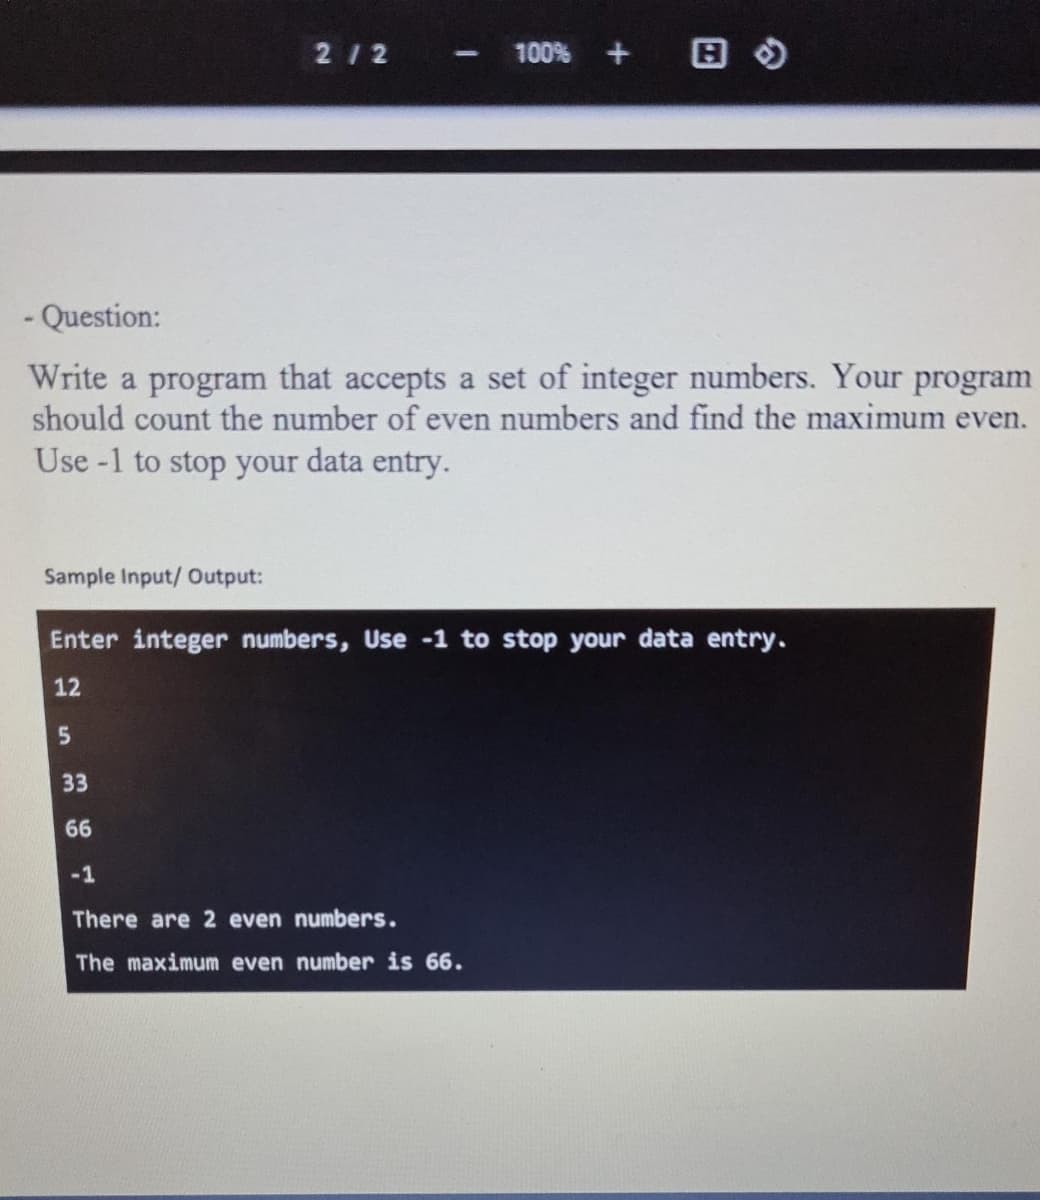 212
100% + B O
- Question:
Write a program that accepts a set of integer numbers. Your program
should count the number of even numbers and find the maximum even.
Use -1 to stop your data entry.
Sample Input/ Output:
Enter integer numbers, Use -1 to stop your data entry.
12
33
66
-1
There are 2 even numbers.
The maximum even number is 66.
